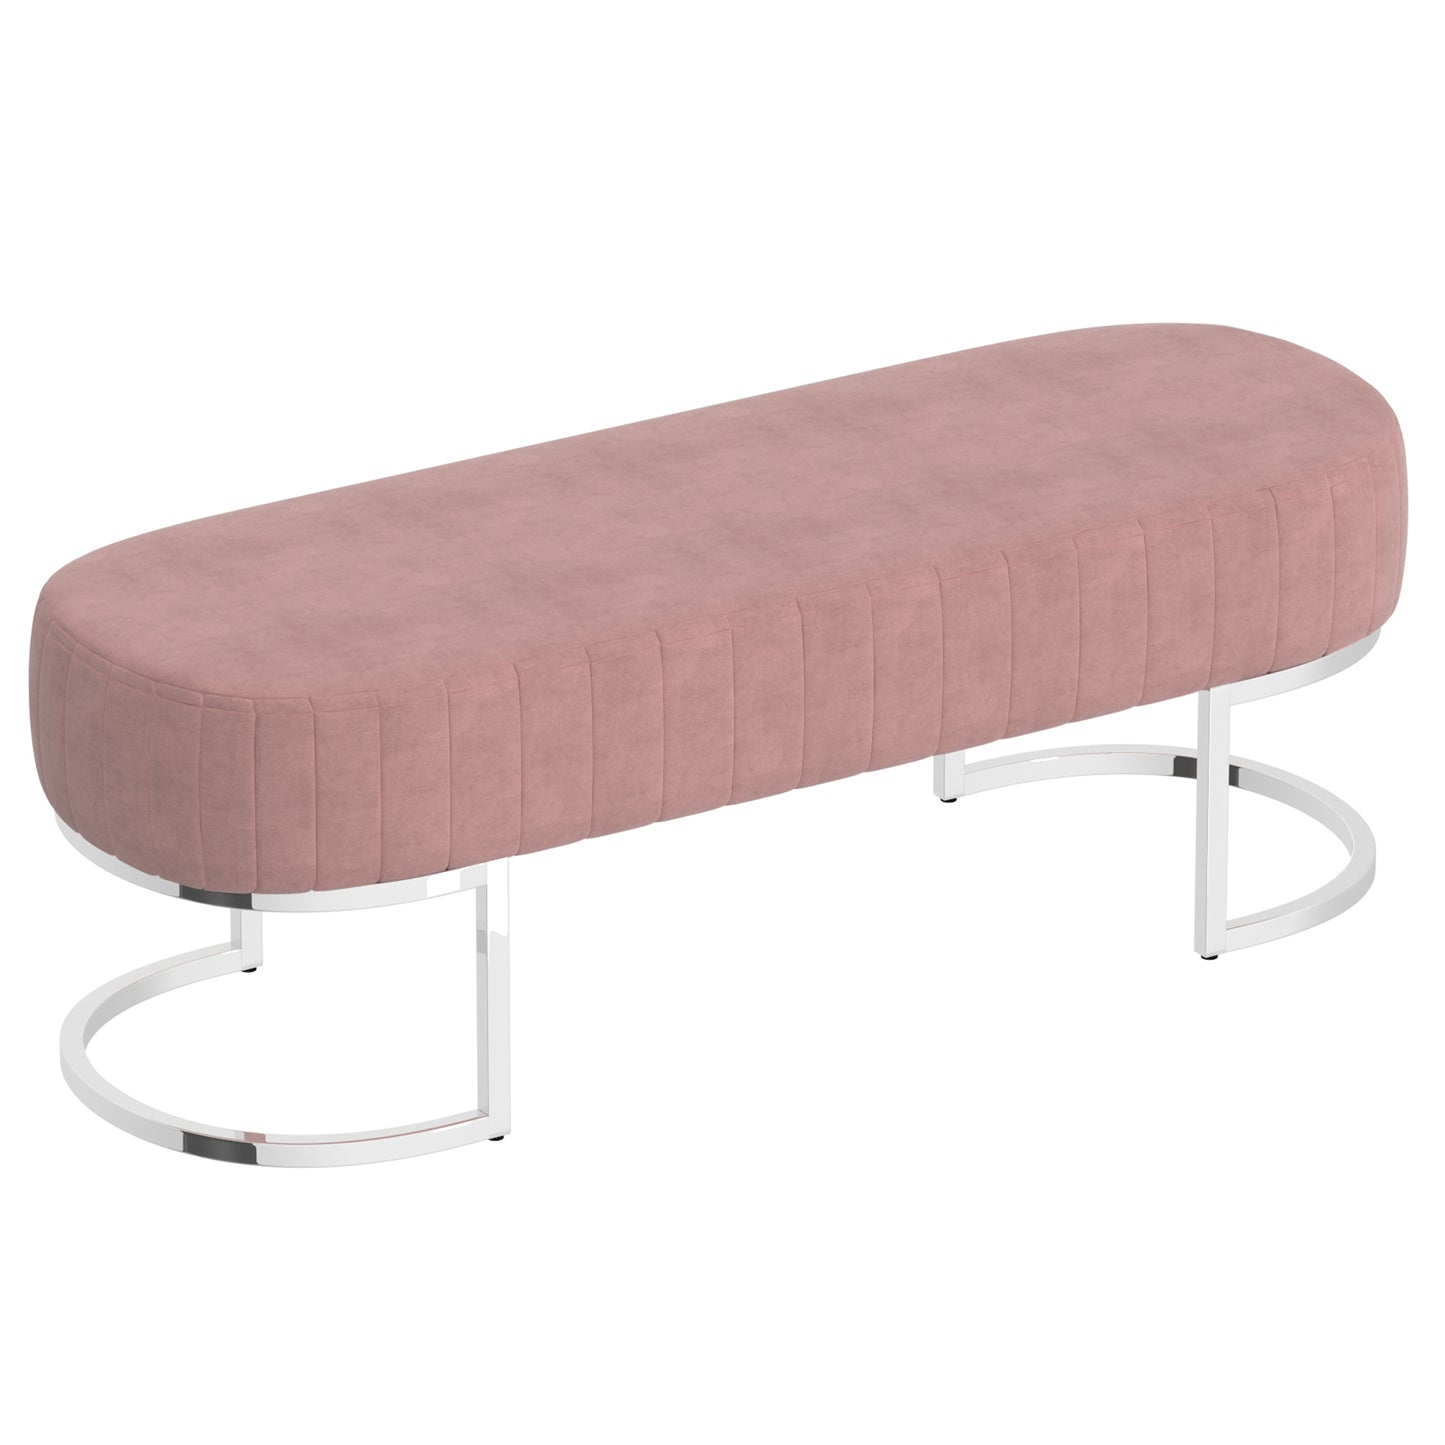 Zamora Bench in Dusty Rose and Silver